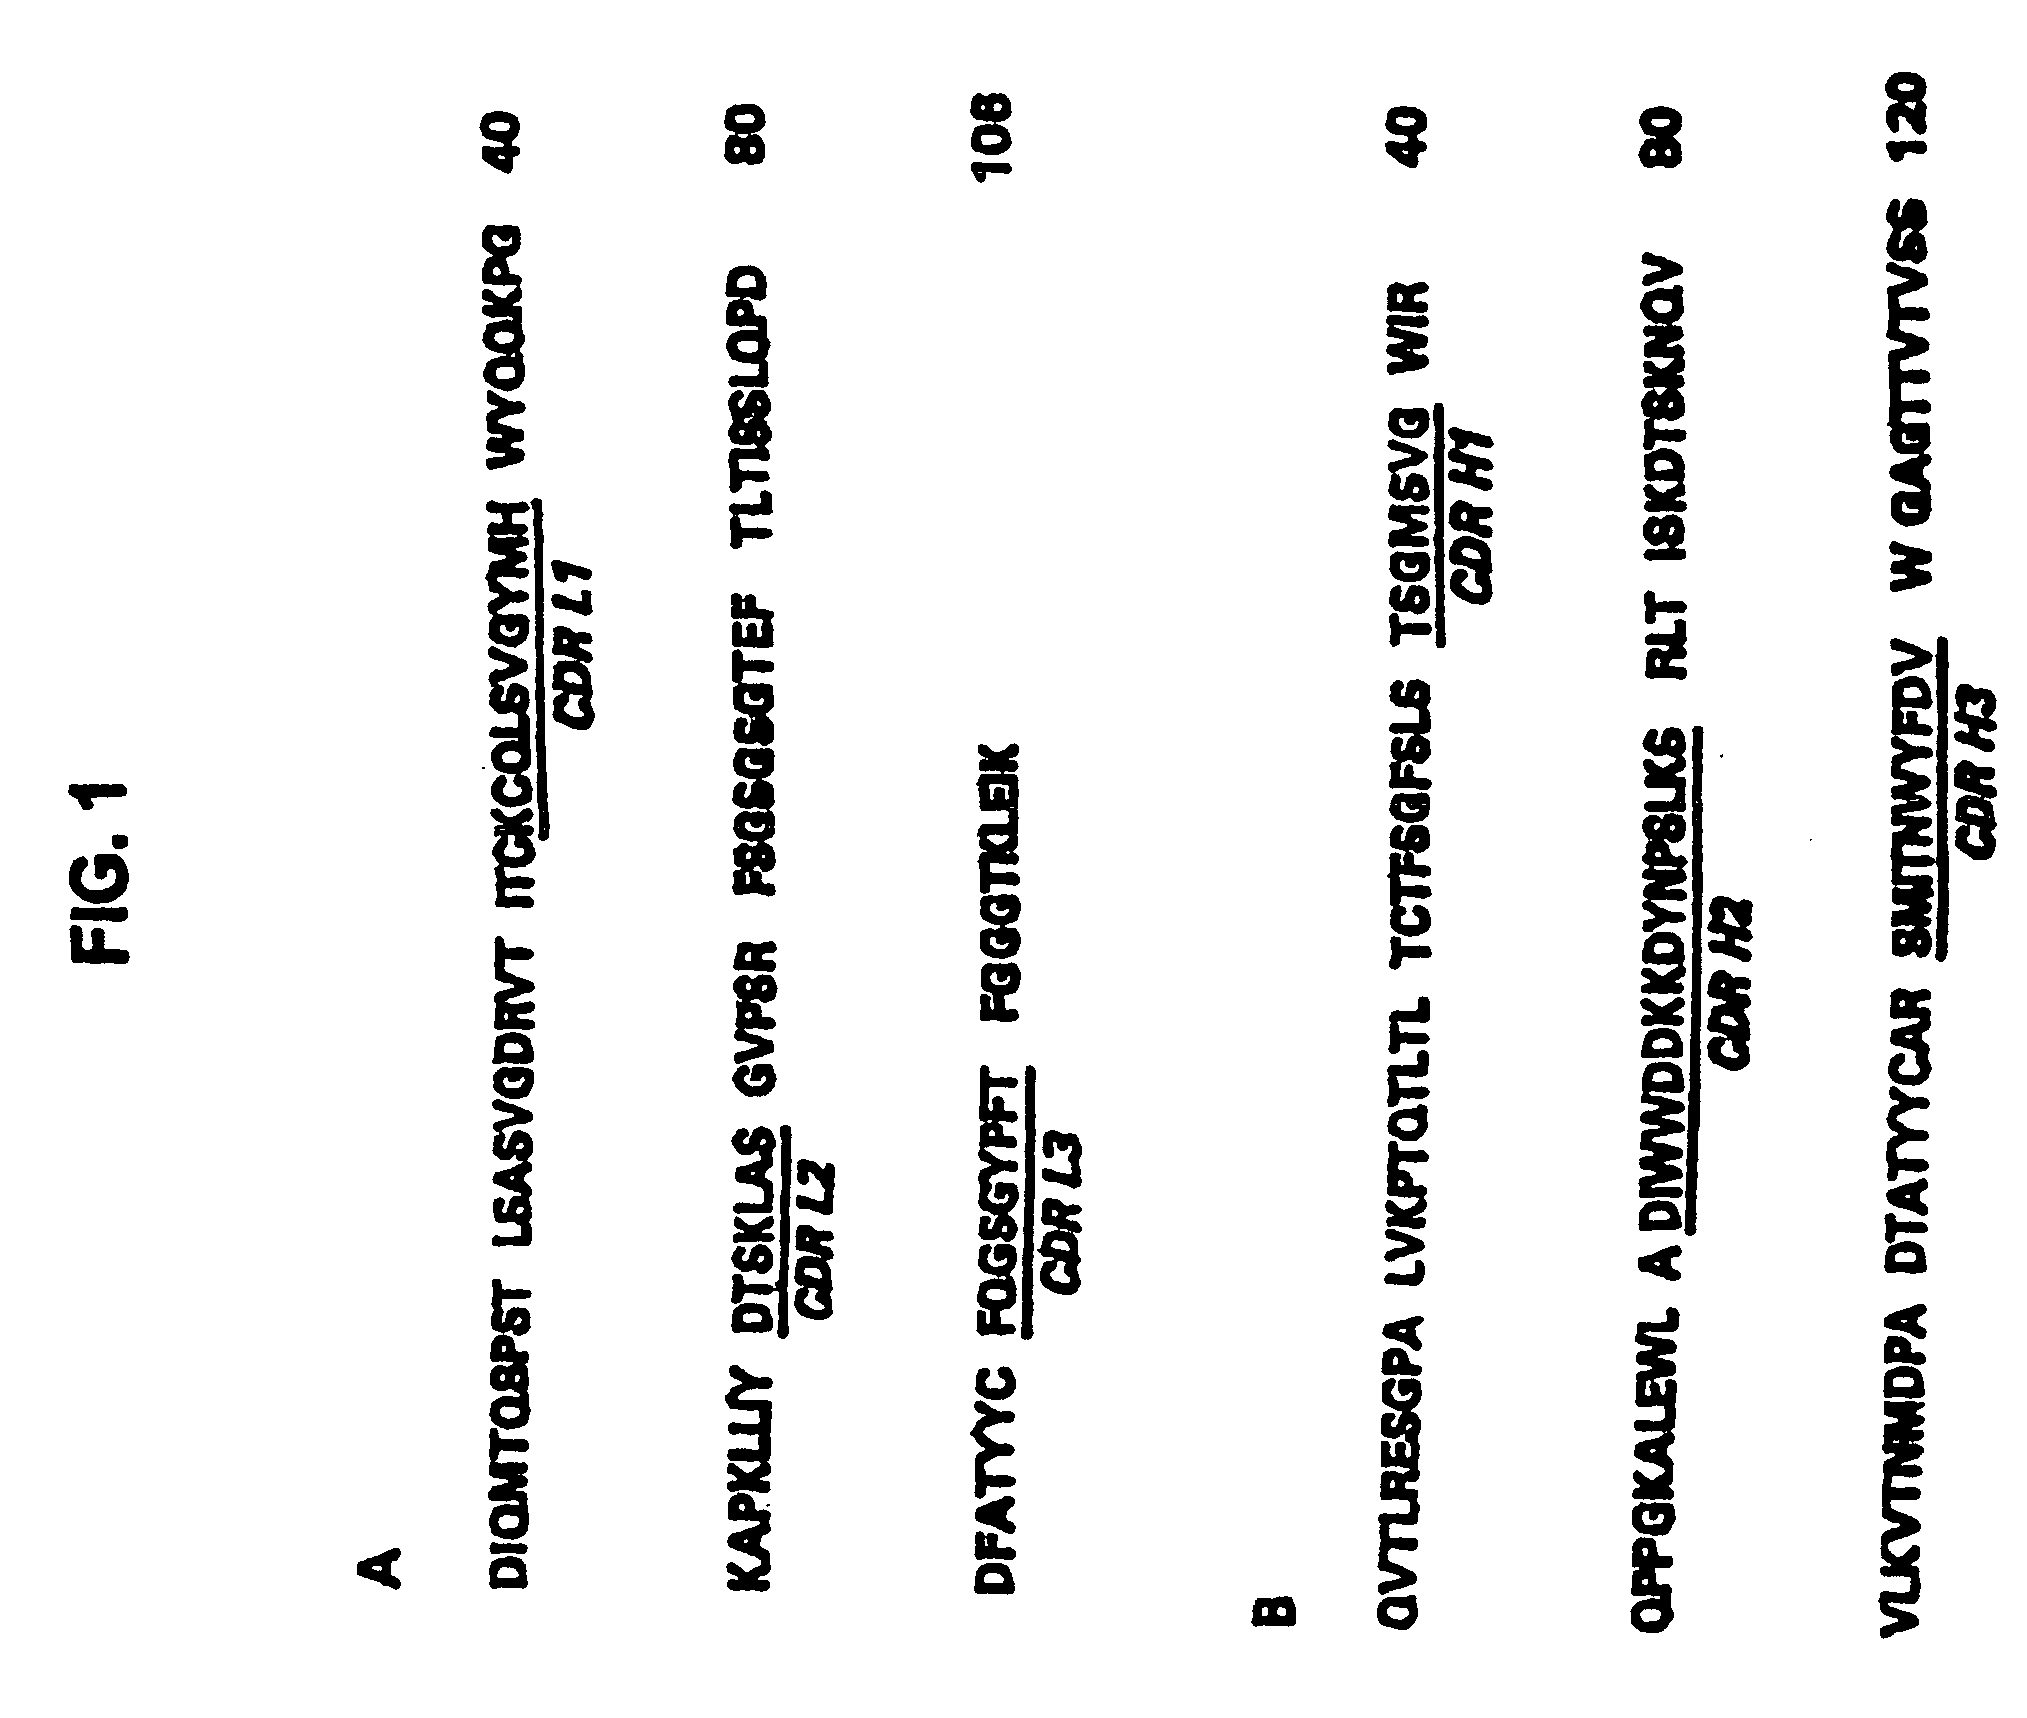 Methods of preventing and treating RSV infections and related conditions